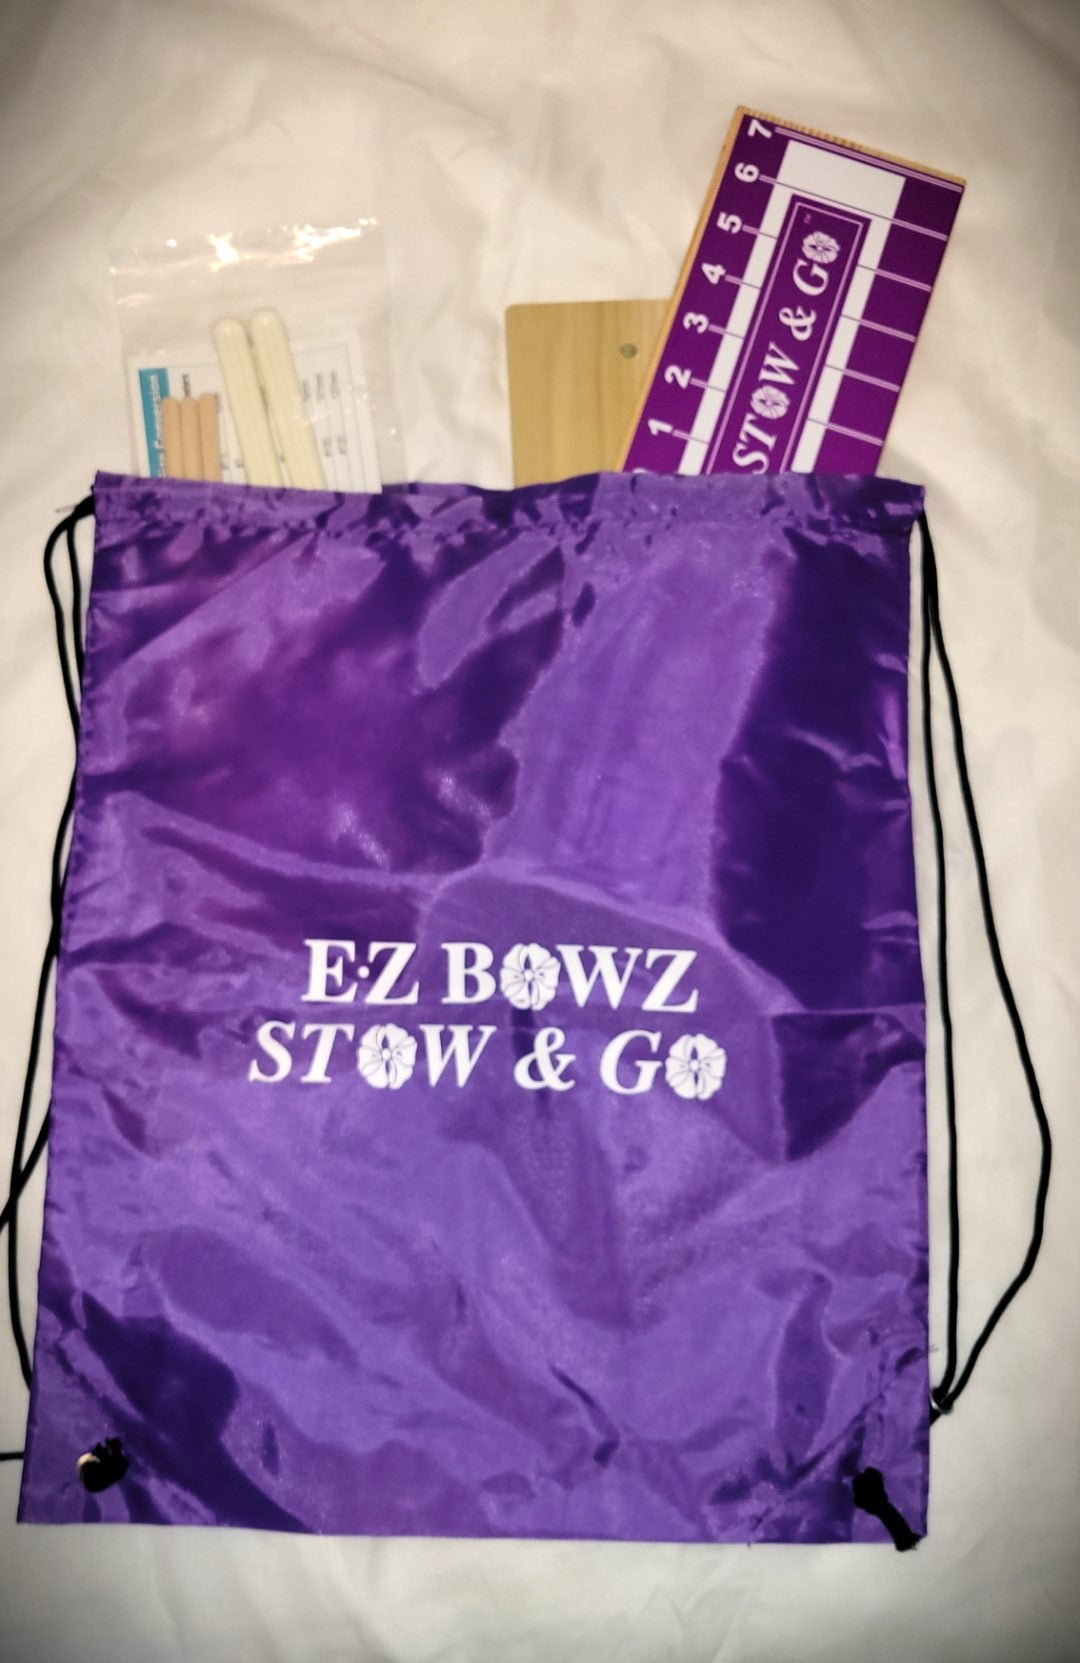 EZ Bowz Stow & Go Bow Maker with Detachable Spool Holder and Tote - Easy Bow Making Tool - Bowmaker for Crafts, Wreath Making, Tree Top Bows, Hair